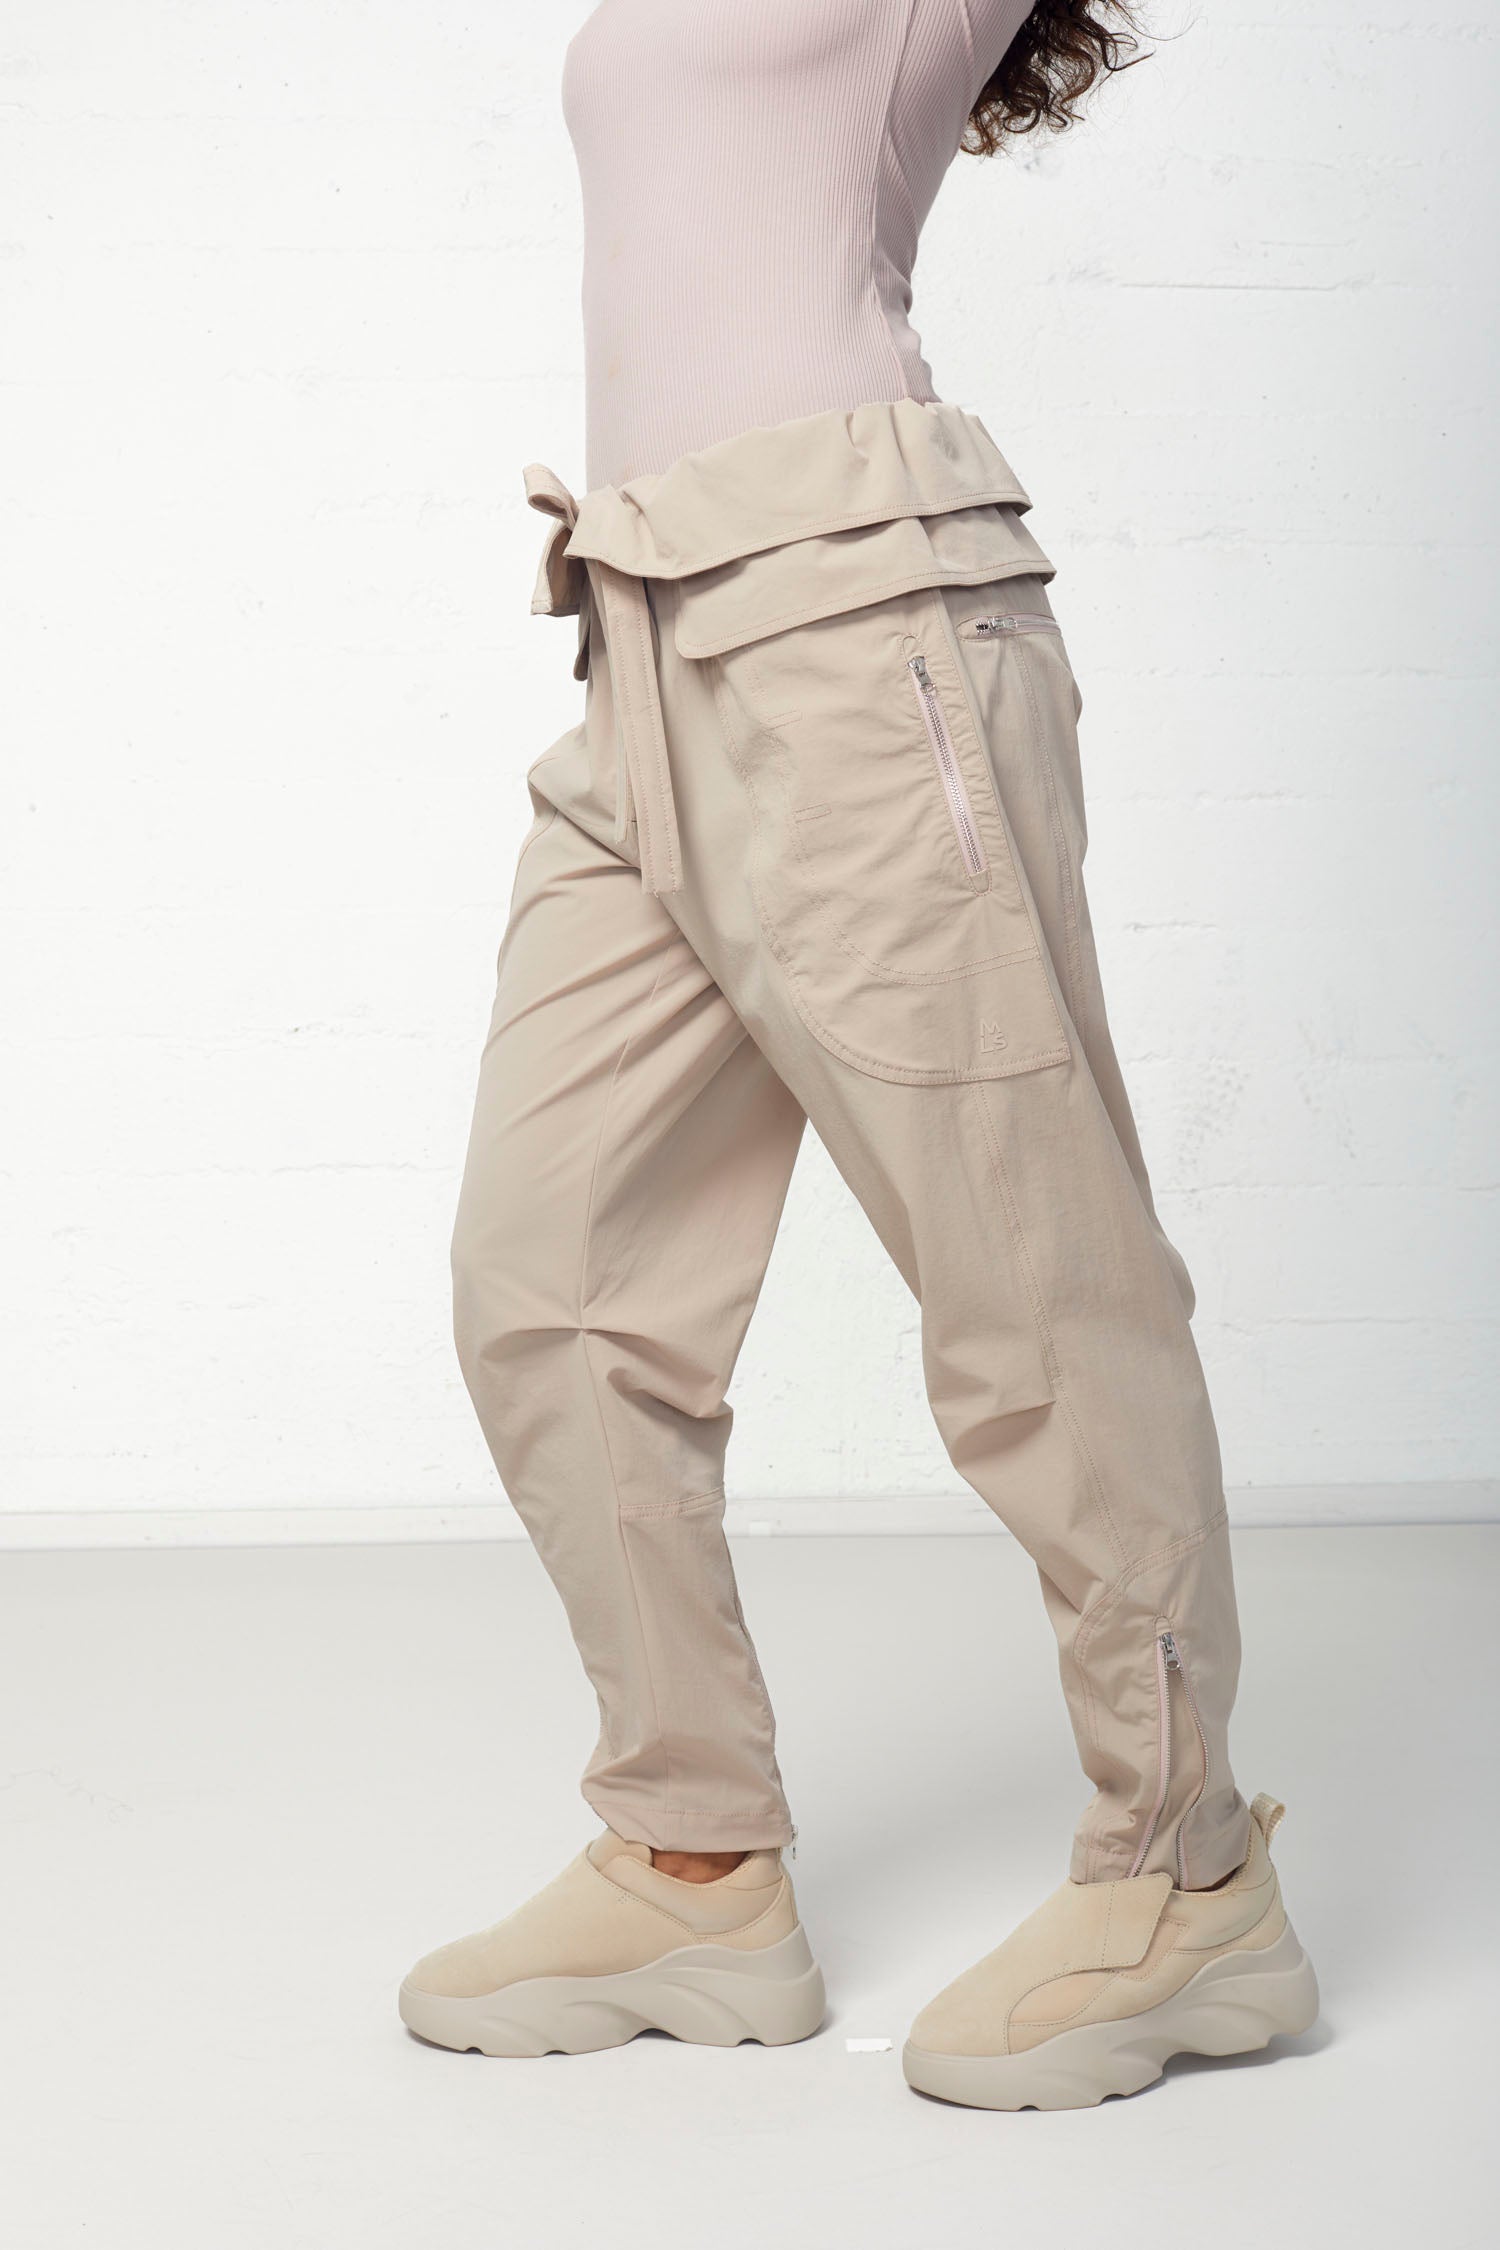 Ashland Relaxed Fit Paperbag Waist Pant